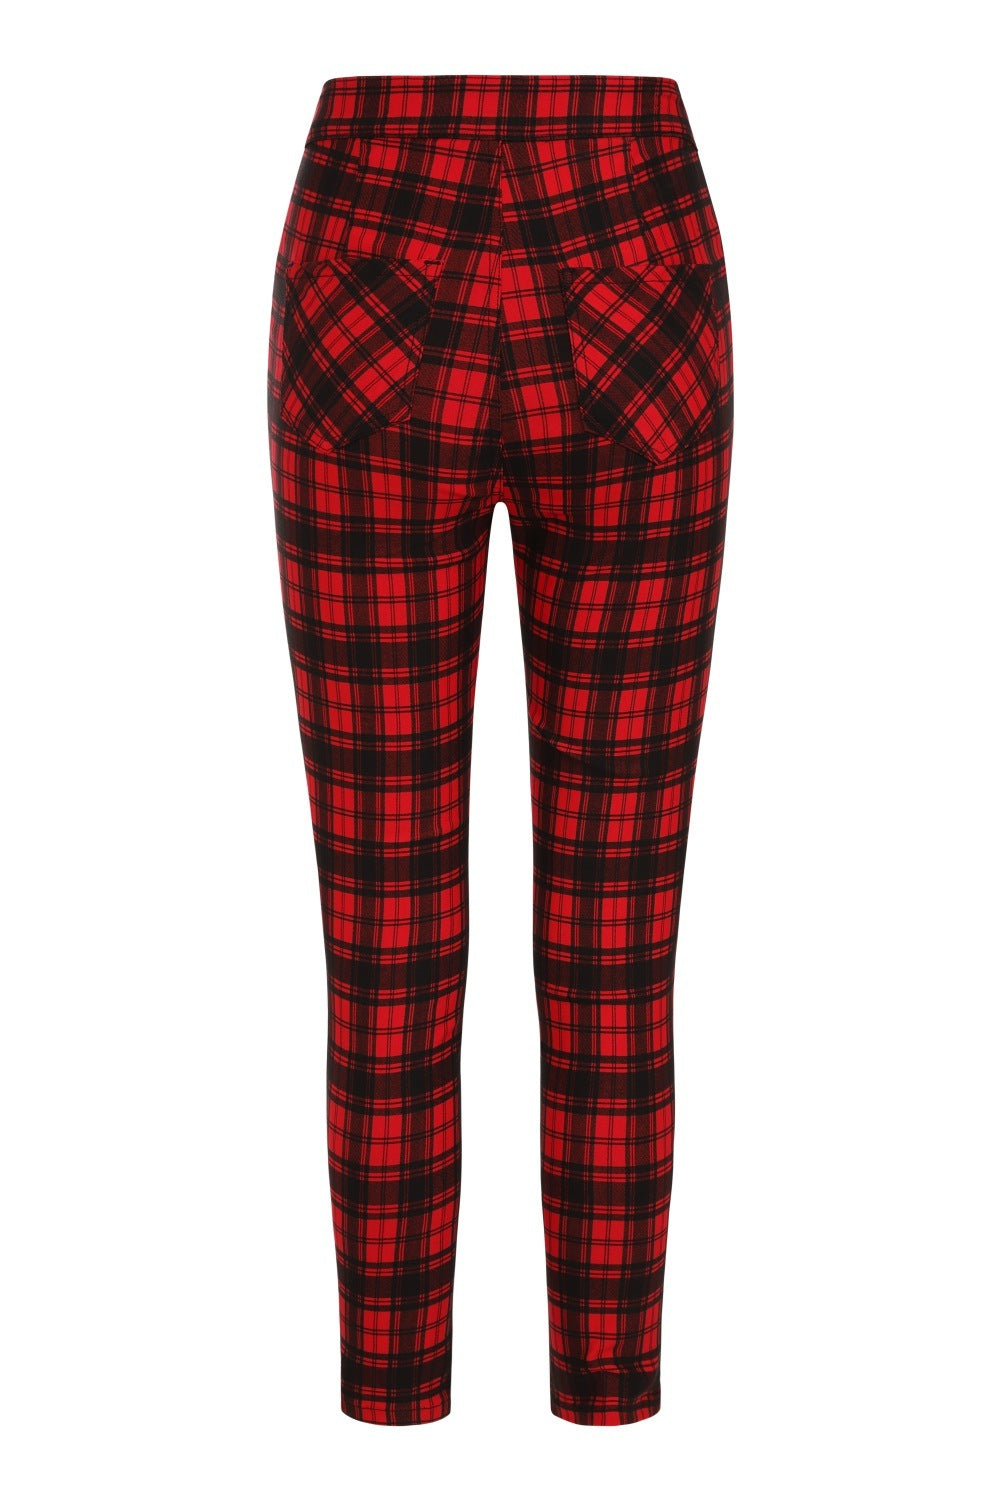 Banned Alternative Damien Stretch Check Trousers